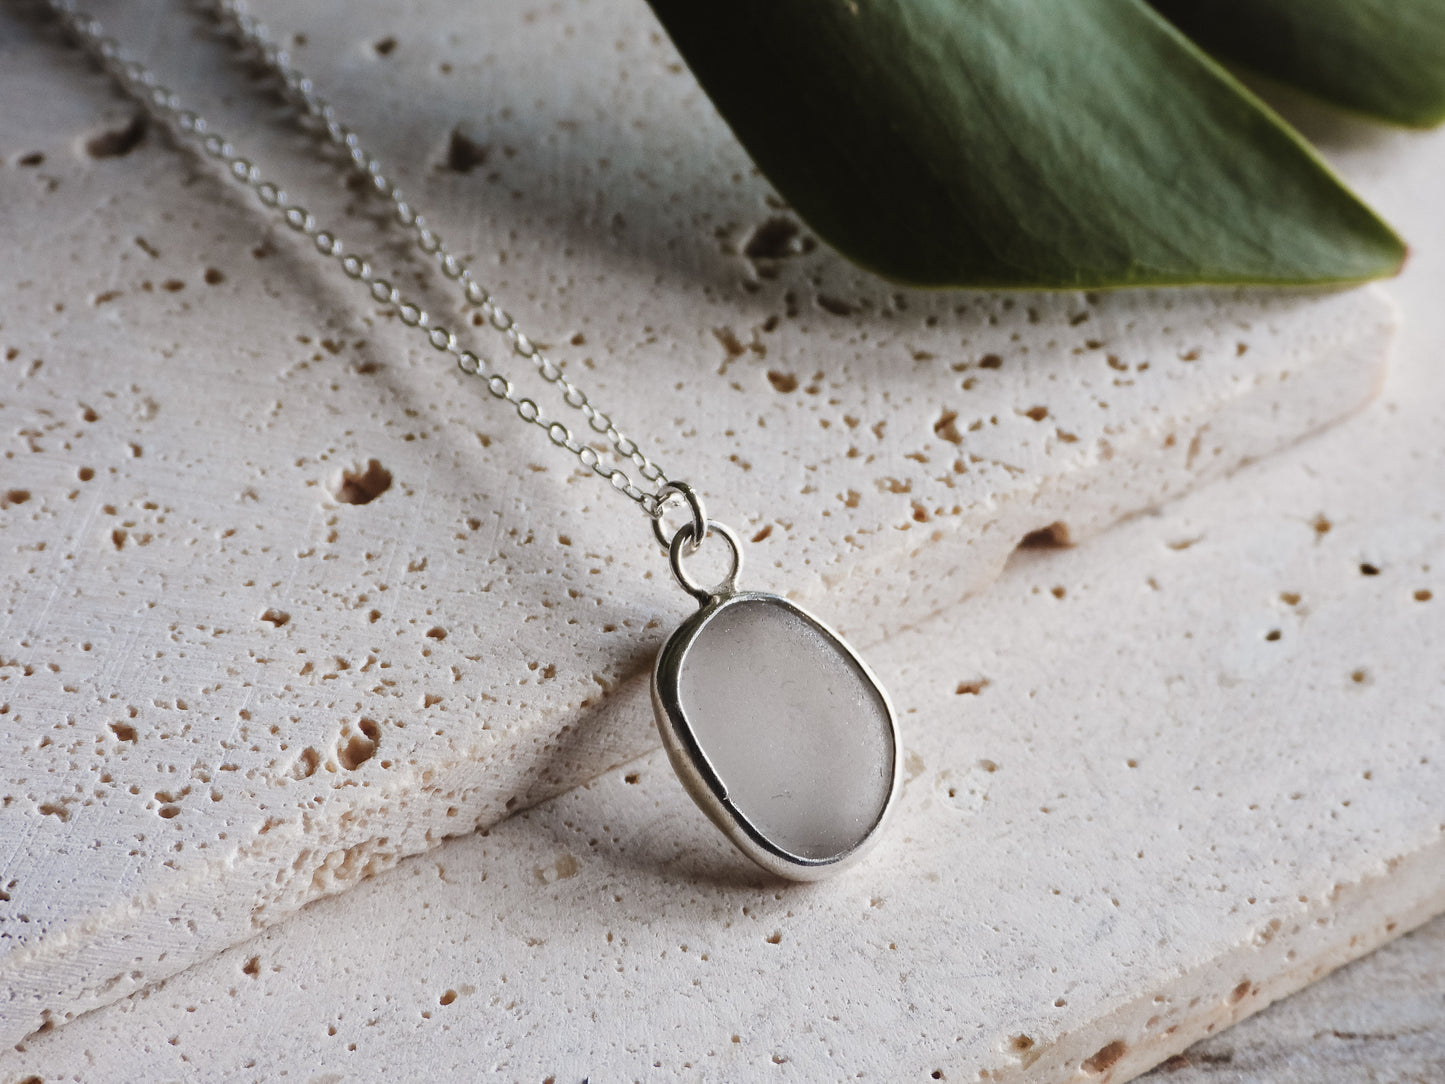 made in Cornwall by Ula Jewellery, grey Cornish seaglass necklace